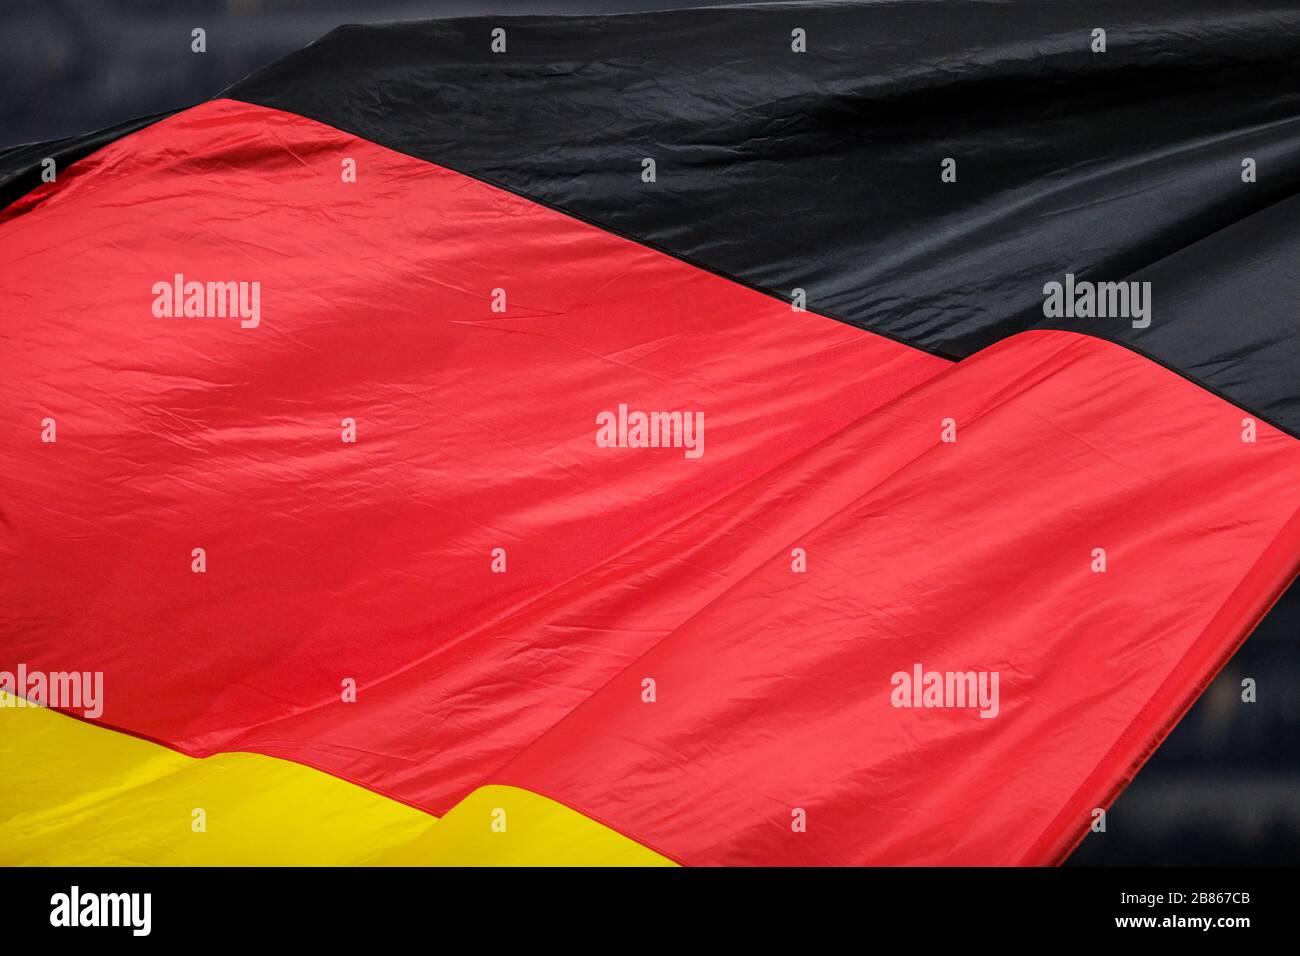 Page 5 - Fussball_landerspiel High Resolution Stock Photography and Images  - Alamy